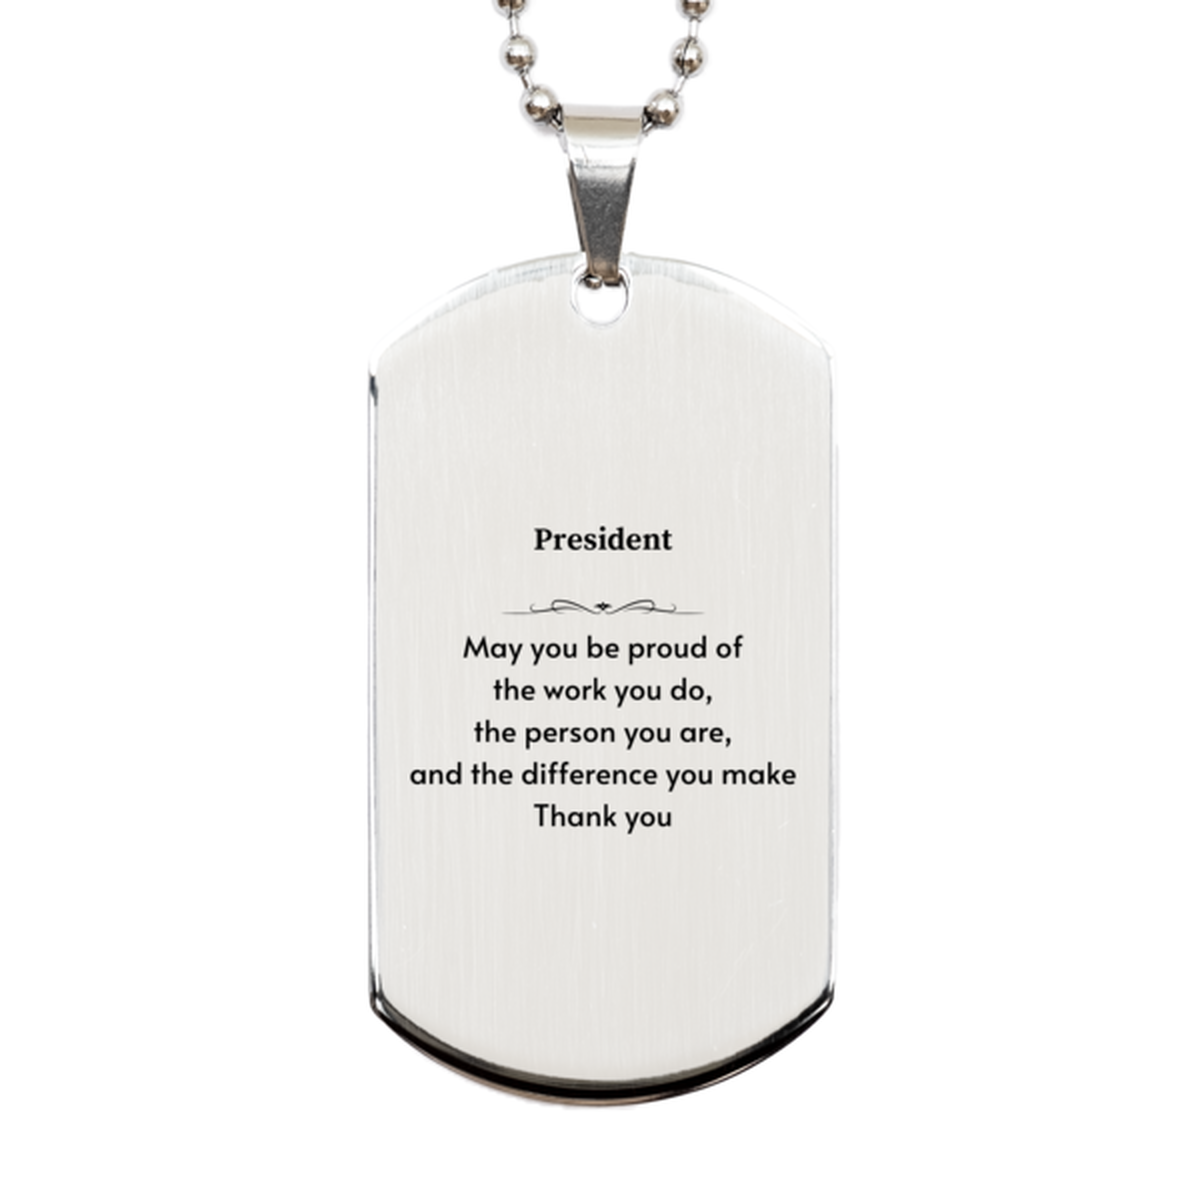 Heartwarming Silver Dog Tag Retirement Coworkers Gifts for President, President May You be proud of the work you do, the person you are Gifts for Boss Men Women Friends